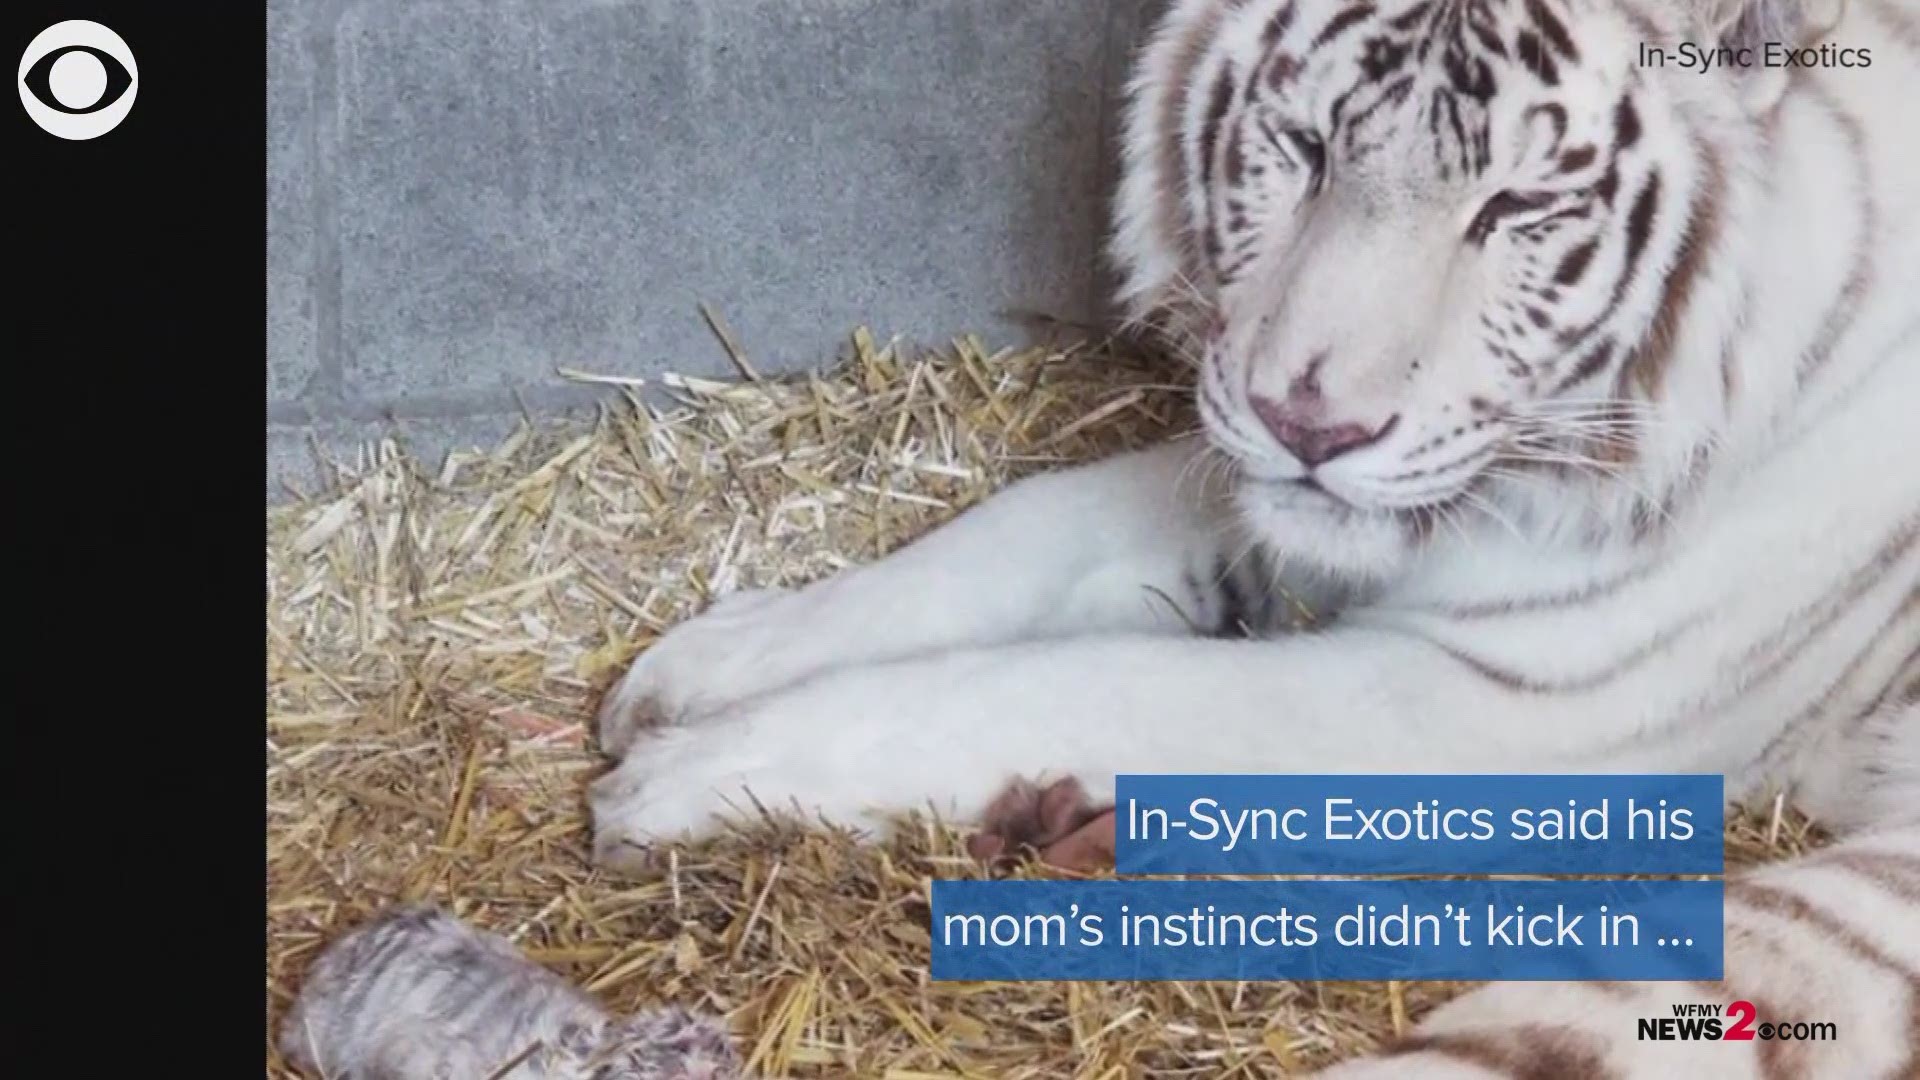 Baby white tiger born at animal sanctuary in Texas. His parents were recently rescued.